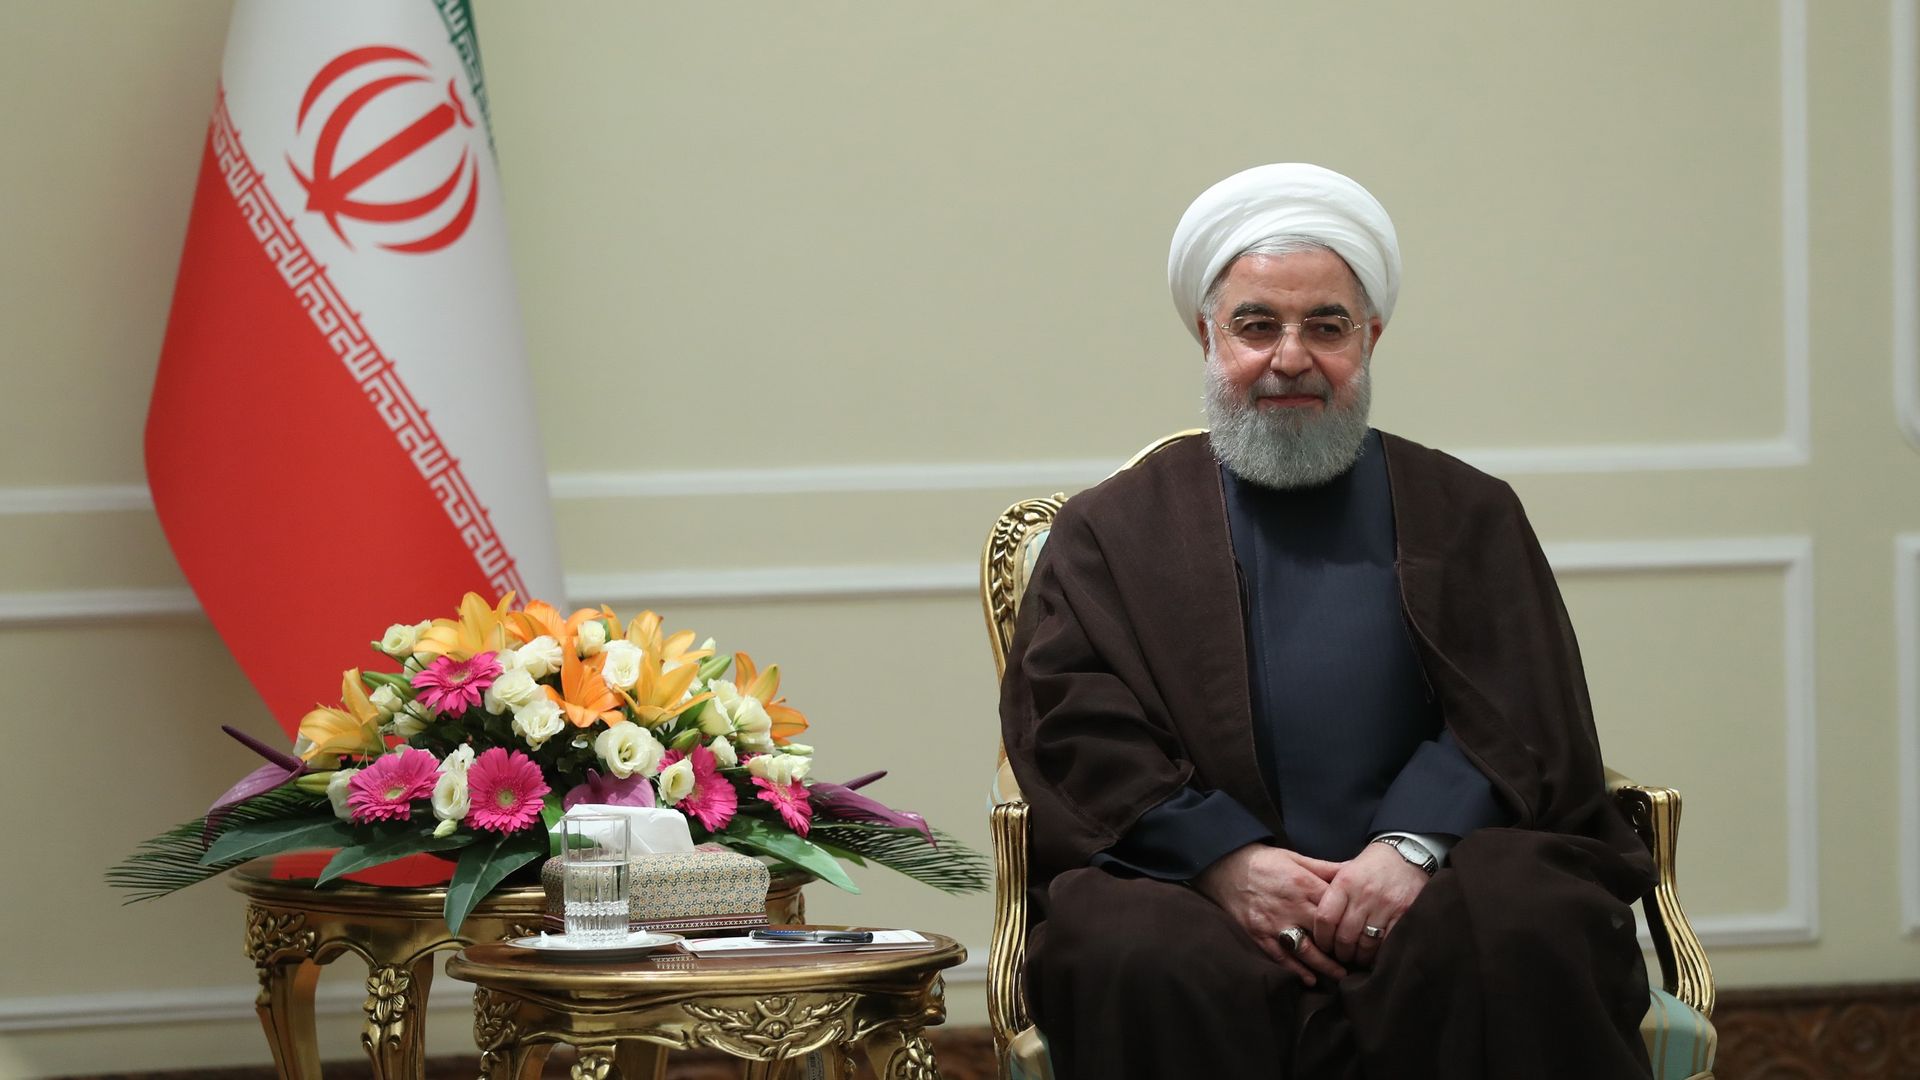 Hassan Rouhani seated in a chair